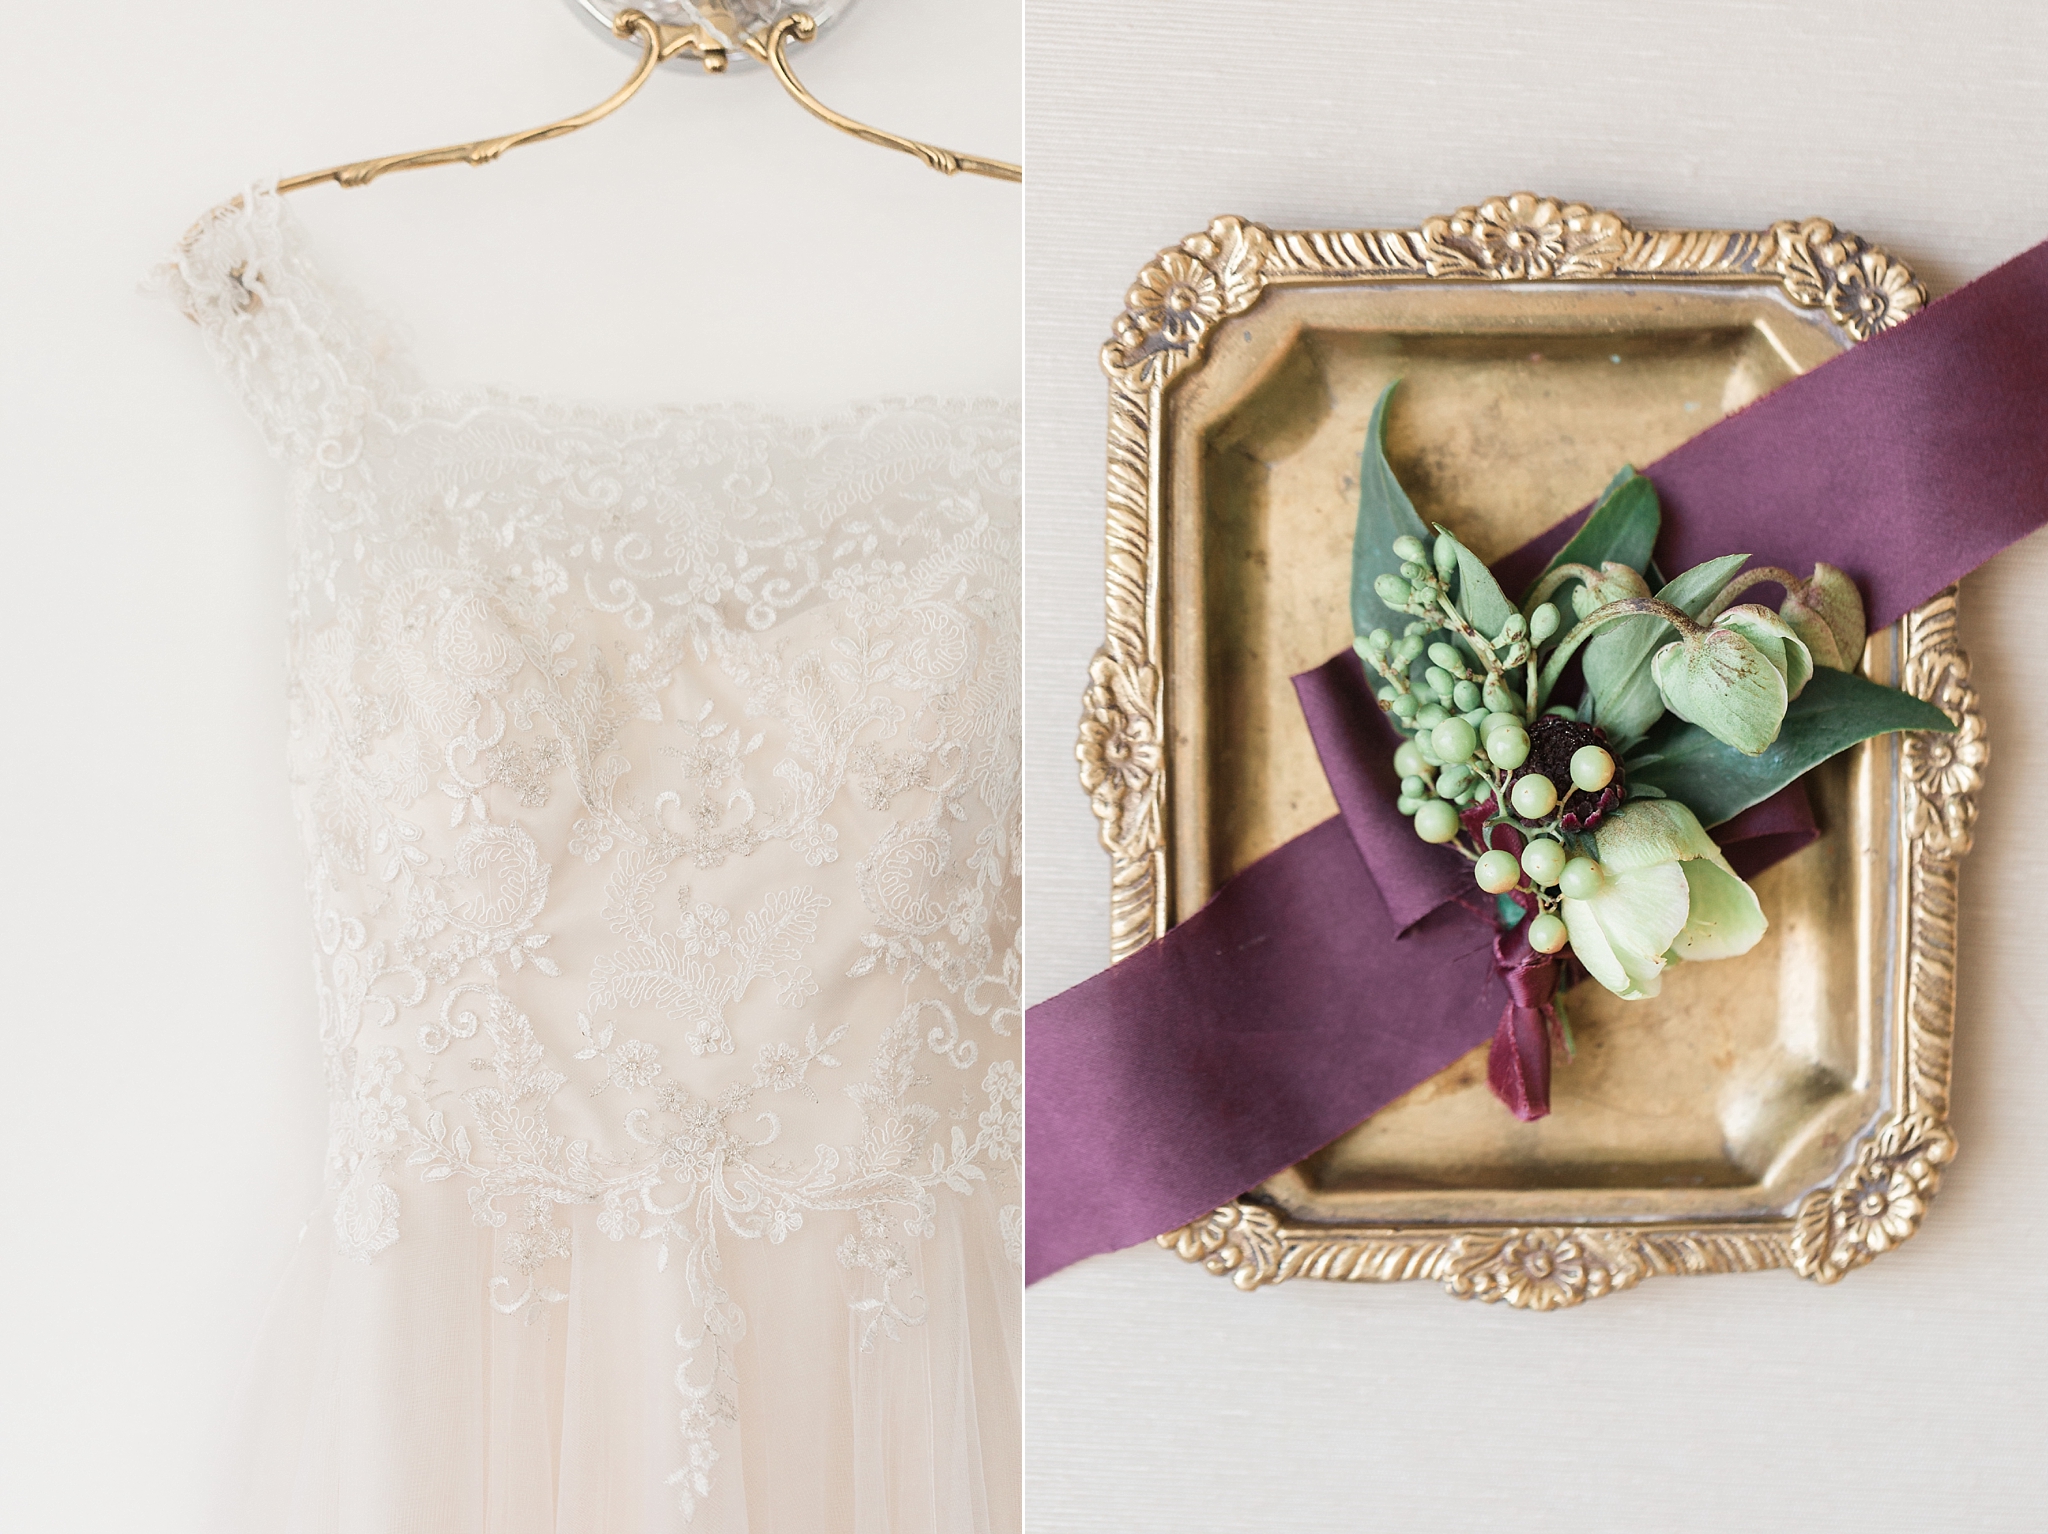 This classic fall wedding at Rixey Manor in Rixeyville, VA features a color palette of navy and gold with pops of plum!